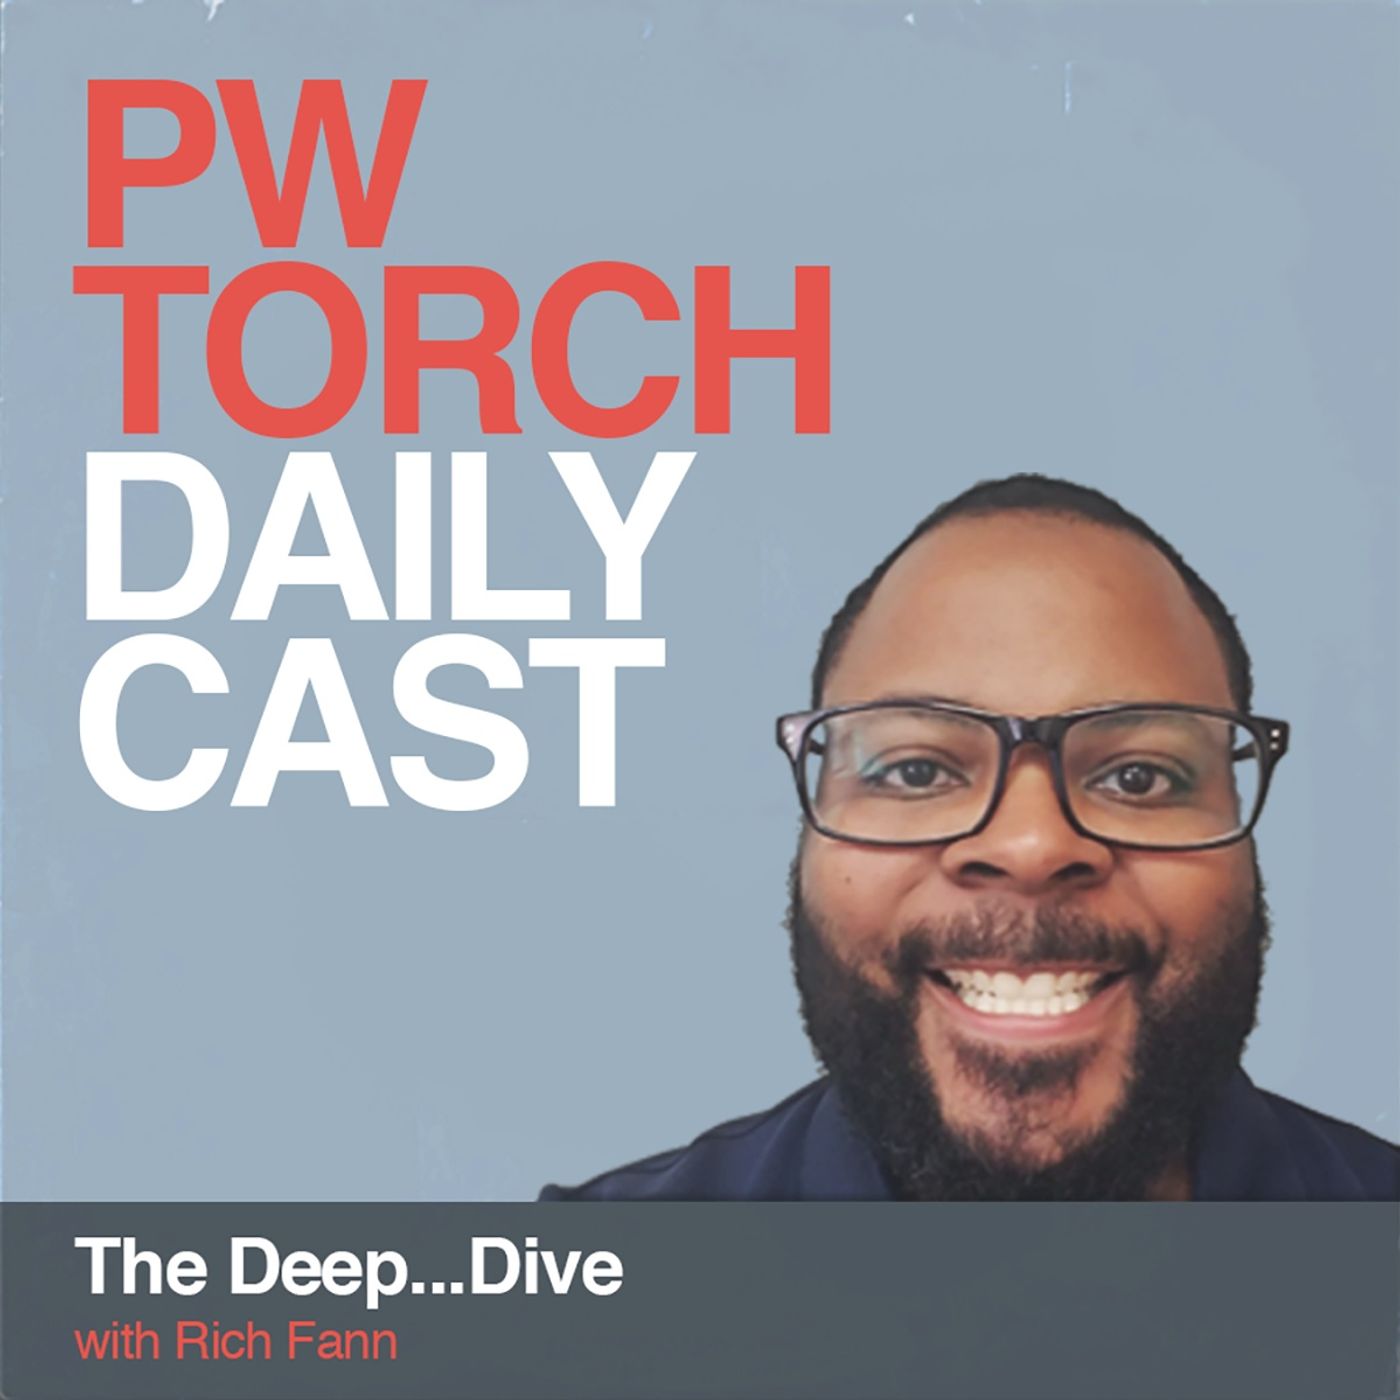 PWTorch Dailycast - The Deep...Dive w/Fann - BBC World's Jonathan Savage joins Rich Fann & Will Cooling to talk politics of wrestling, more